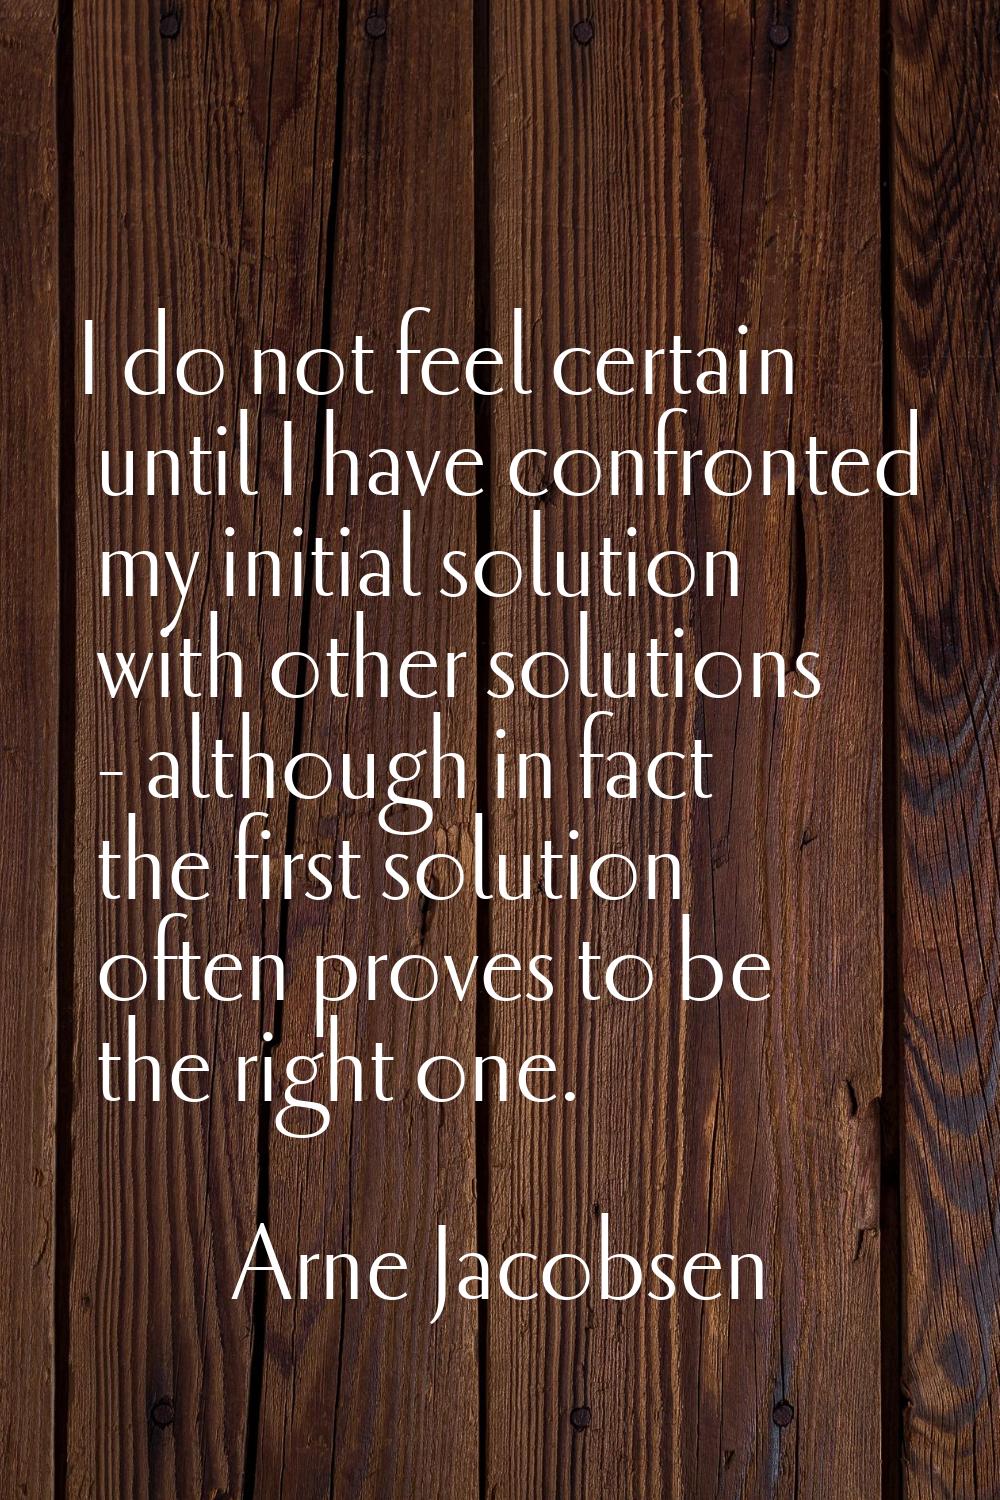 I do not feel certain until I have confronted my initial solution with other solutions - although i